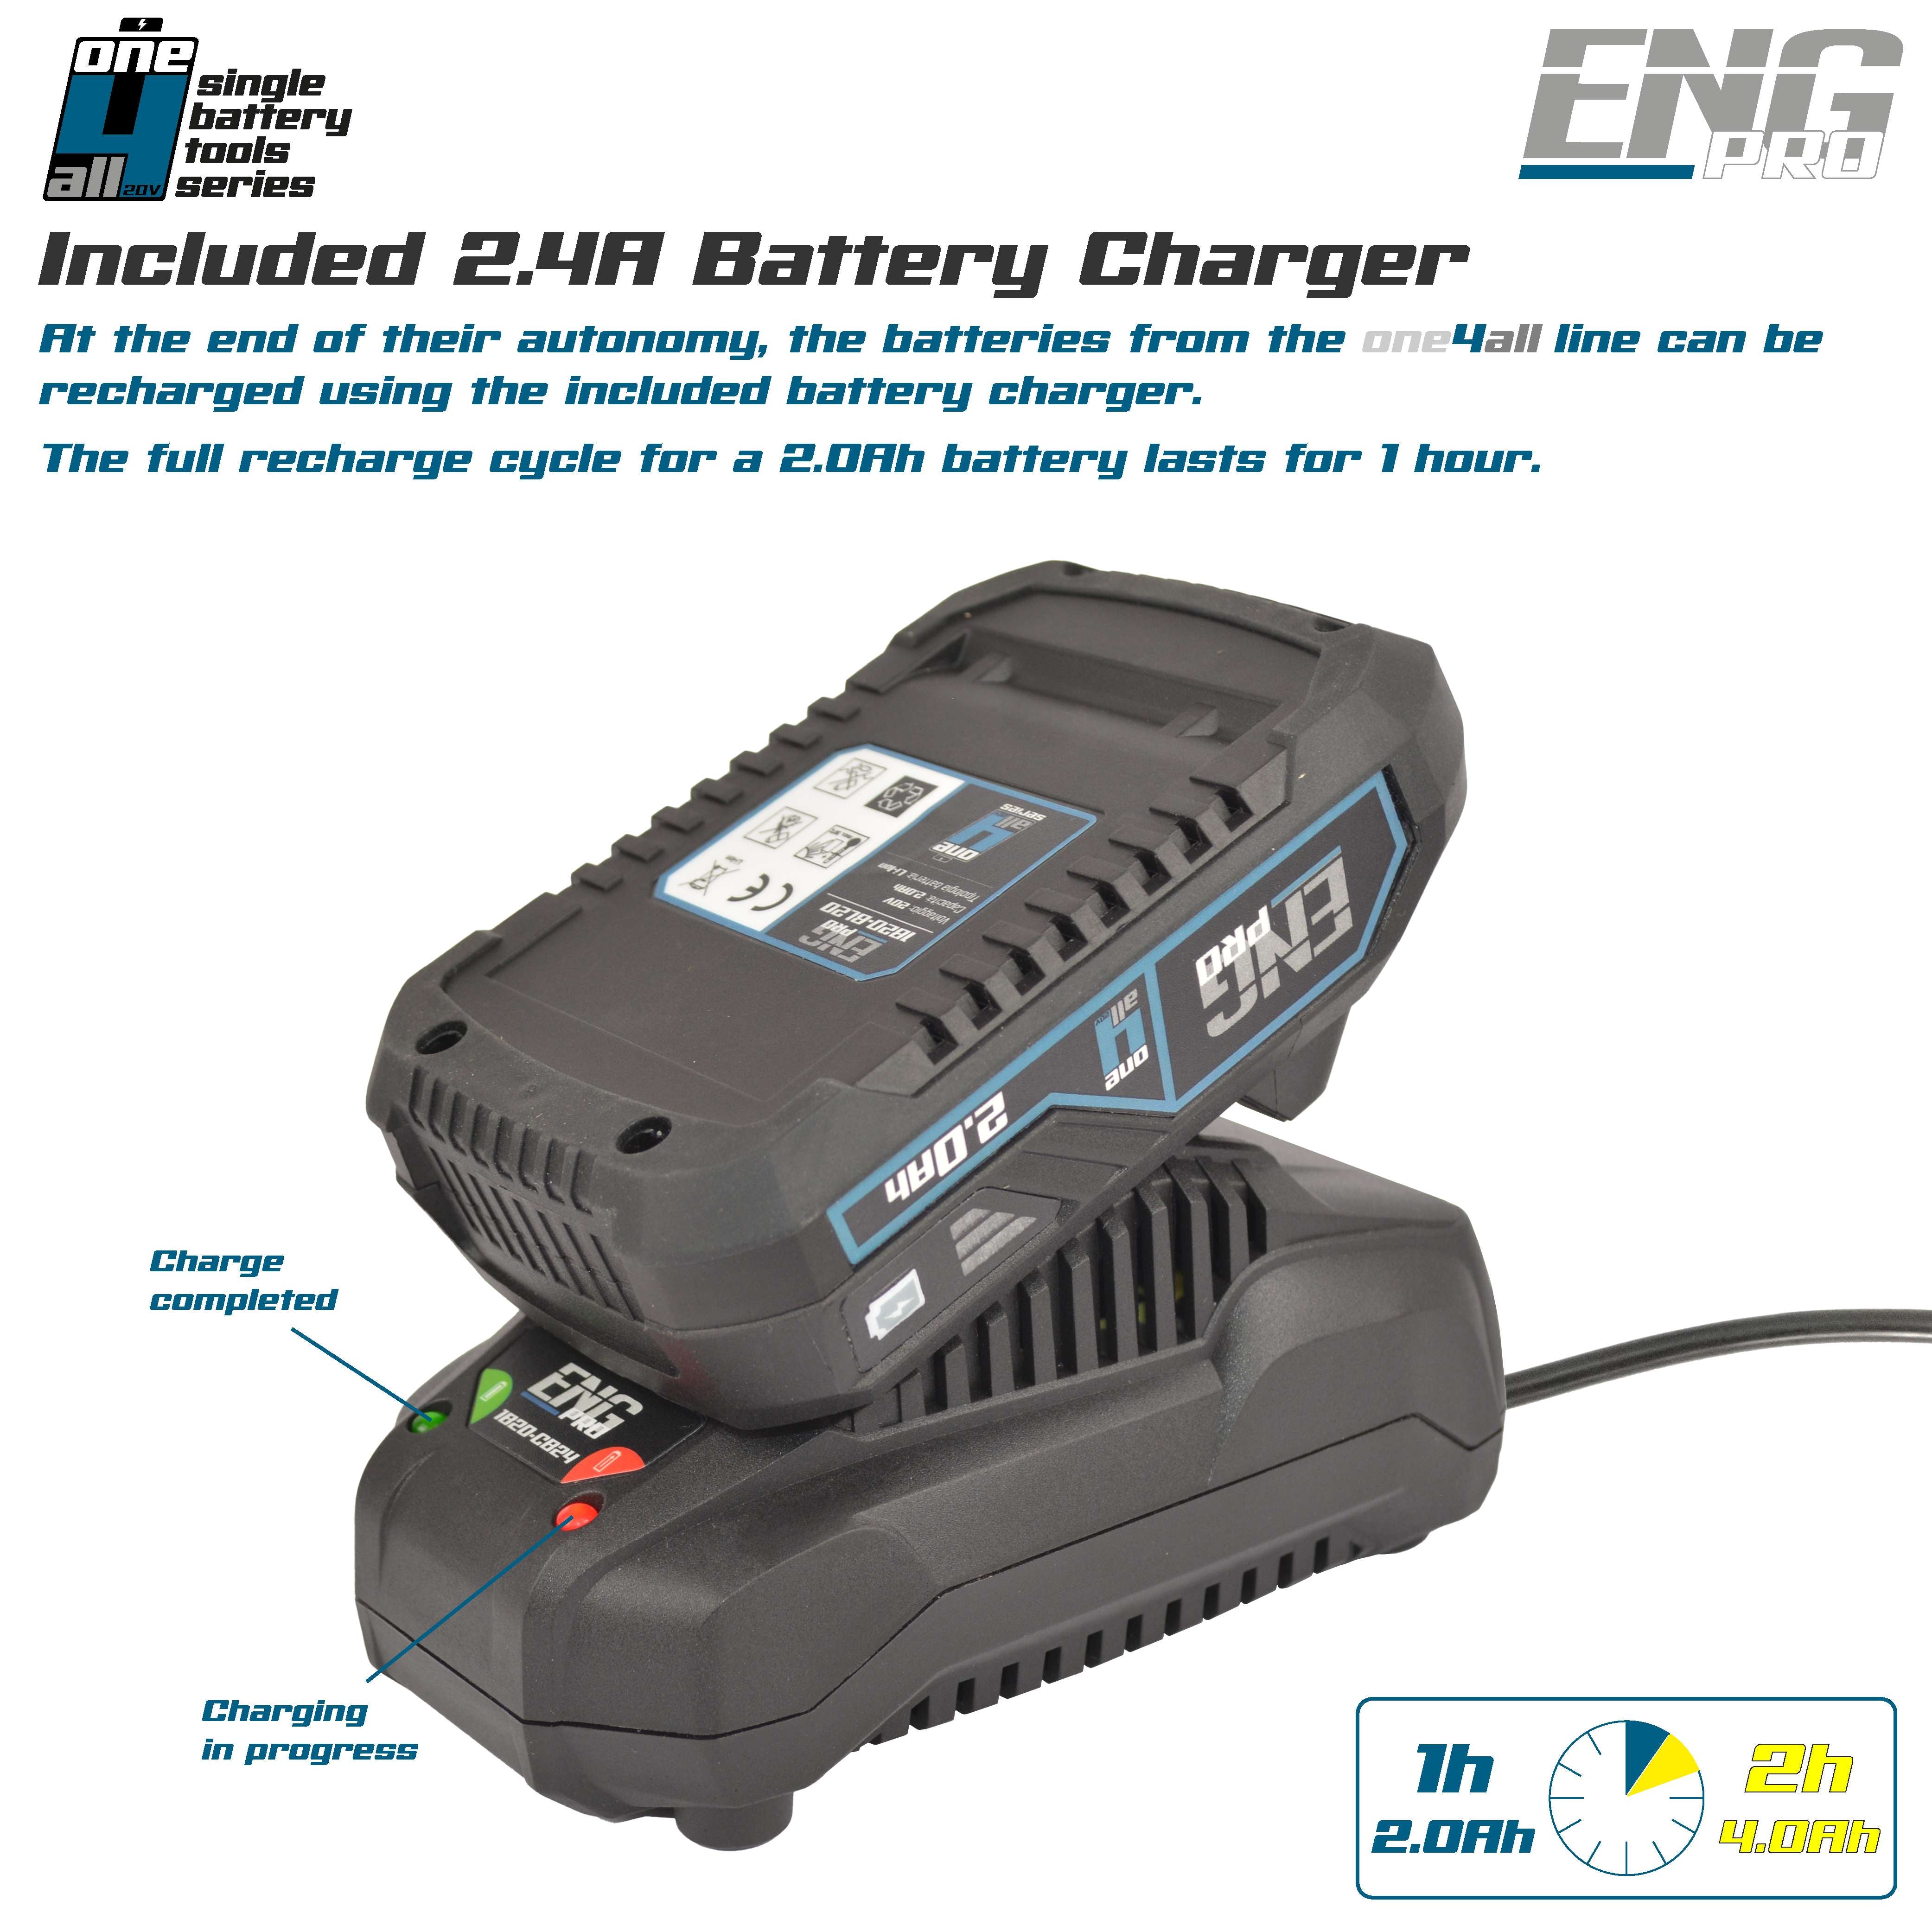 Battery 20V 2.0 Ah ONE4ALL - ENG PRO